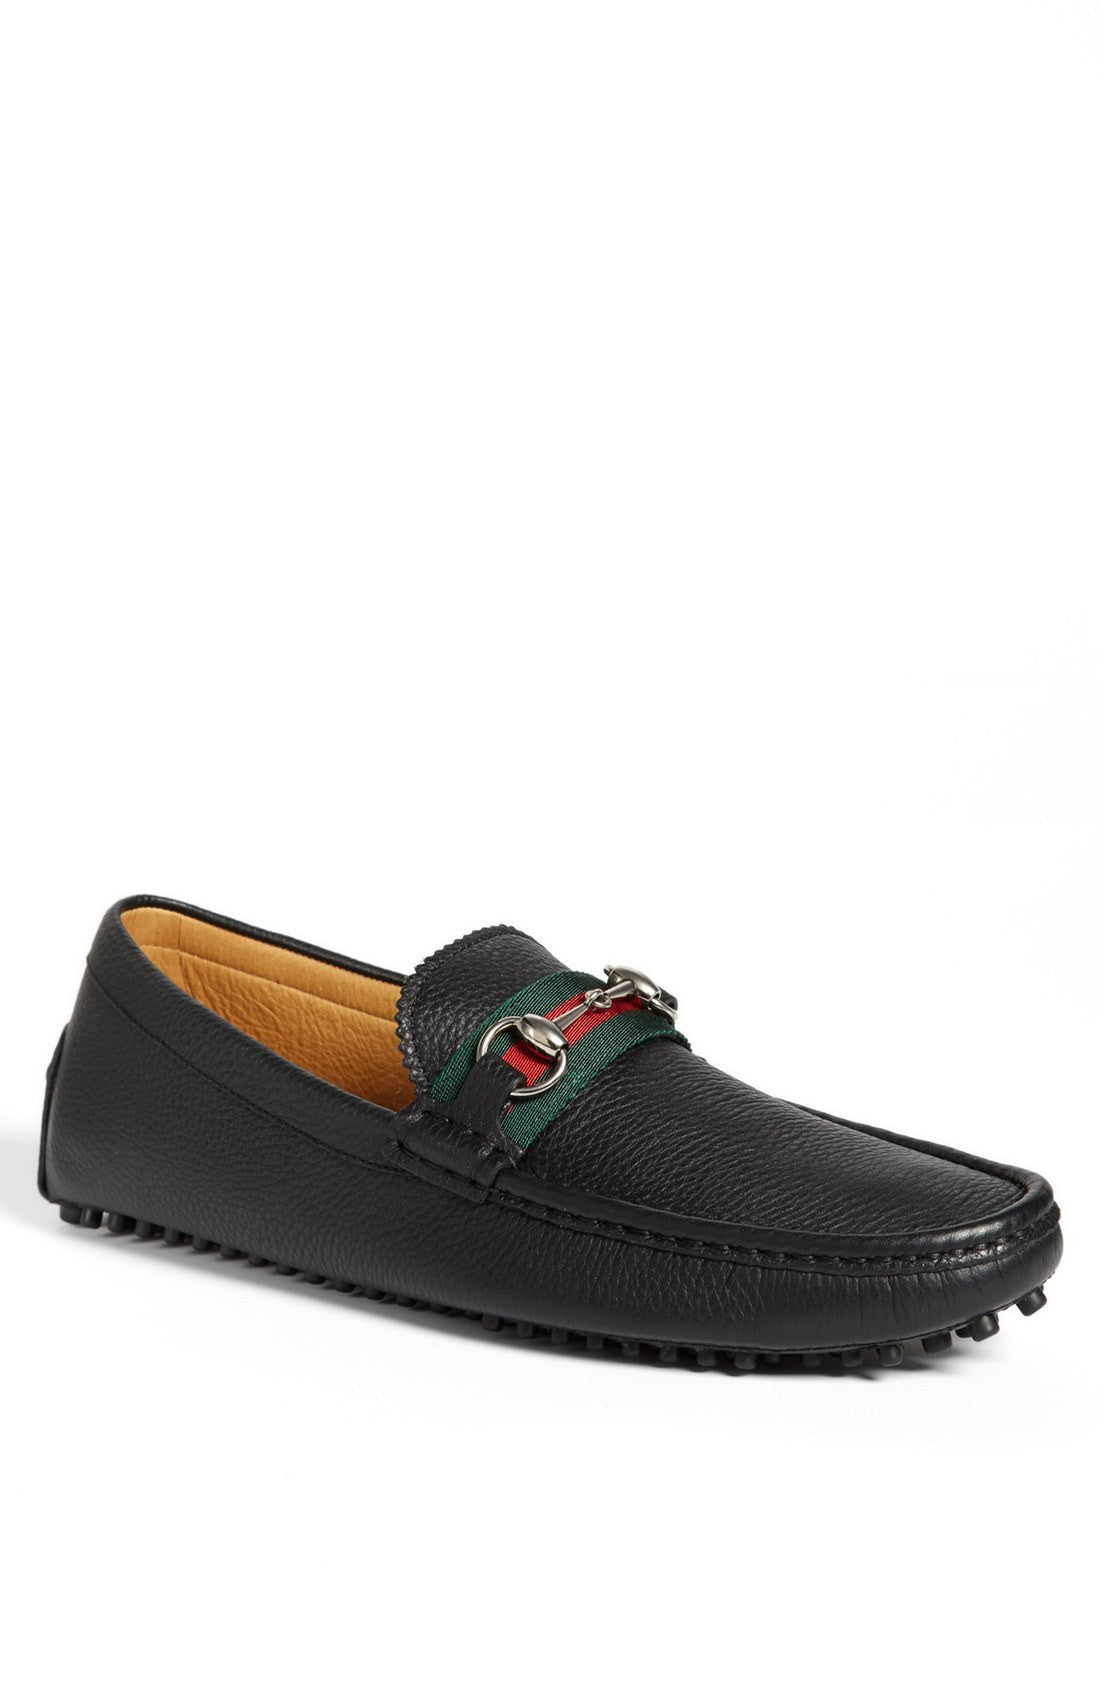 Loafer  Shoes